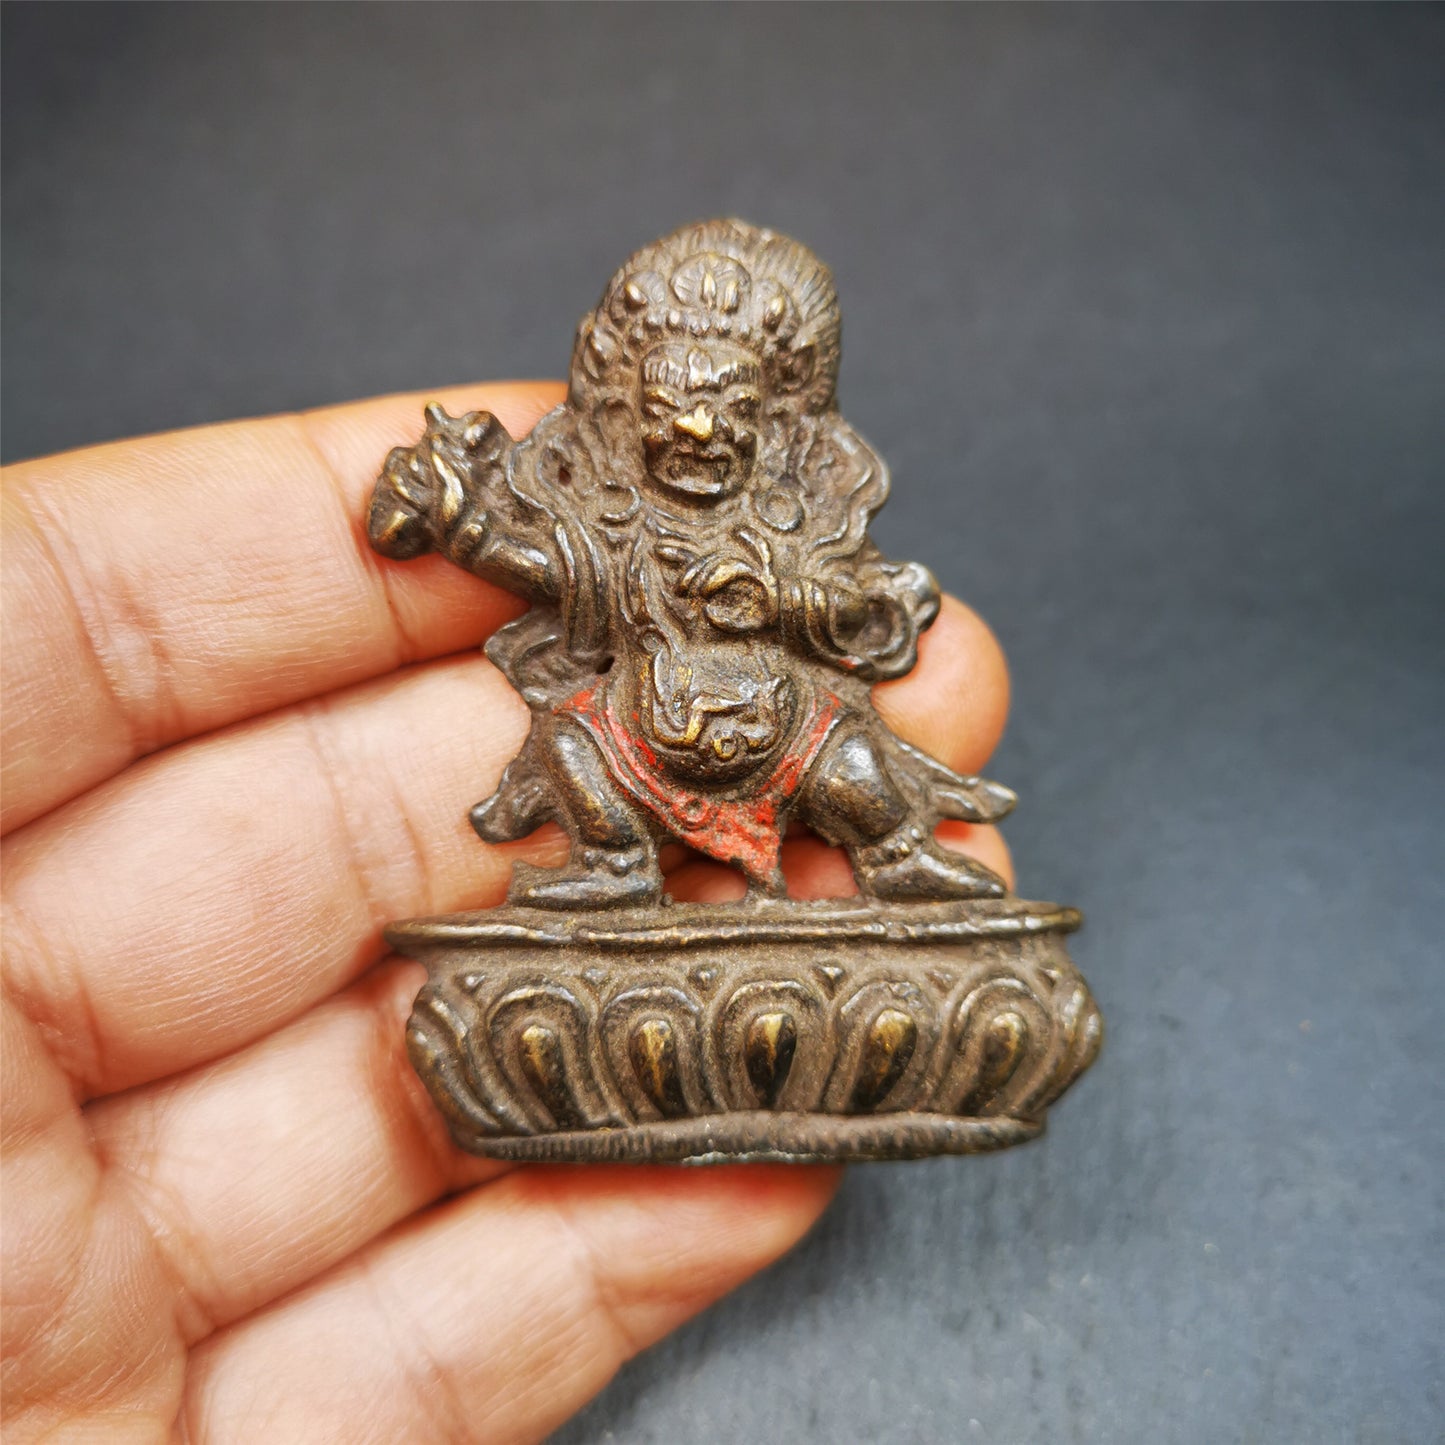 This vajrapani statue was collected from Samyé Monastray, the first monastery in Tibet,and important Nyingma monsatery. It's an old-fashioned Vajrapani statue,about 60 years old,made of copper and painted with mineral pigments,height is 2.52 inches.